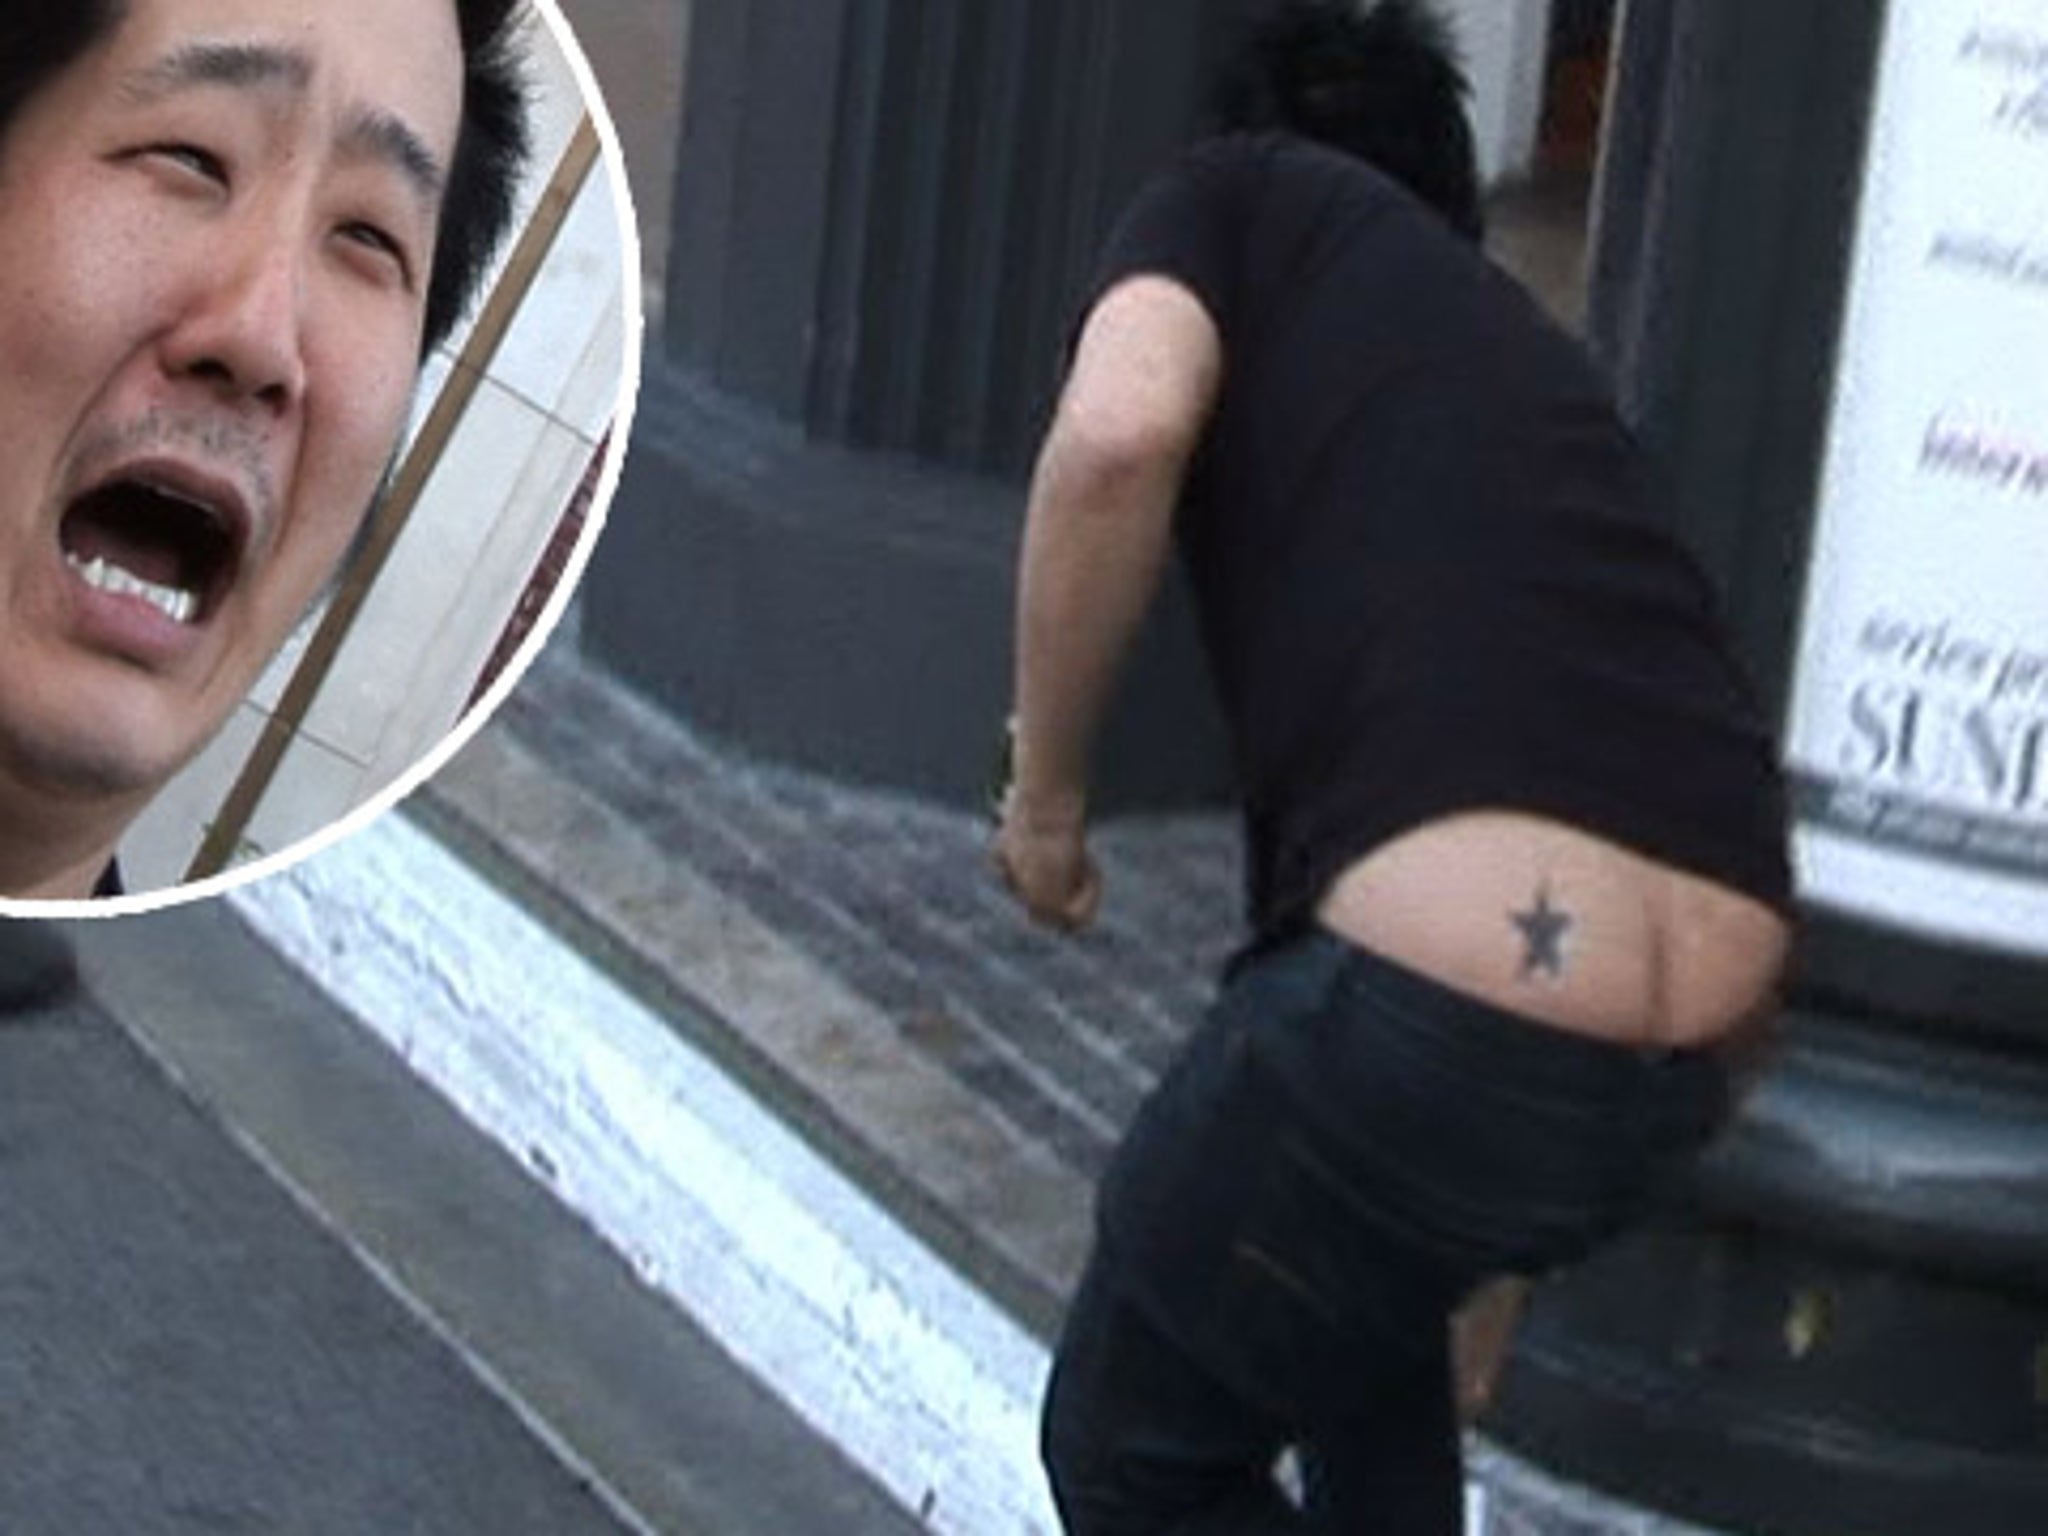 Getting A Tattoo With Strict Asian Parents  Unhelpful Advice w Bobby Lee  and Thomas Lennon  YouTube